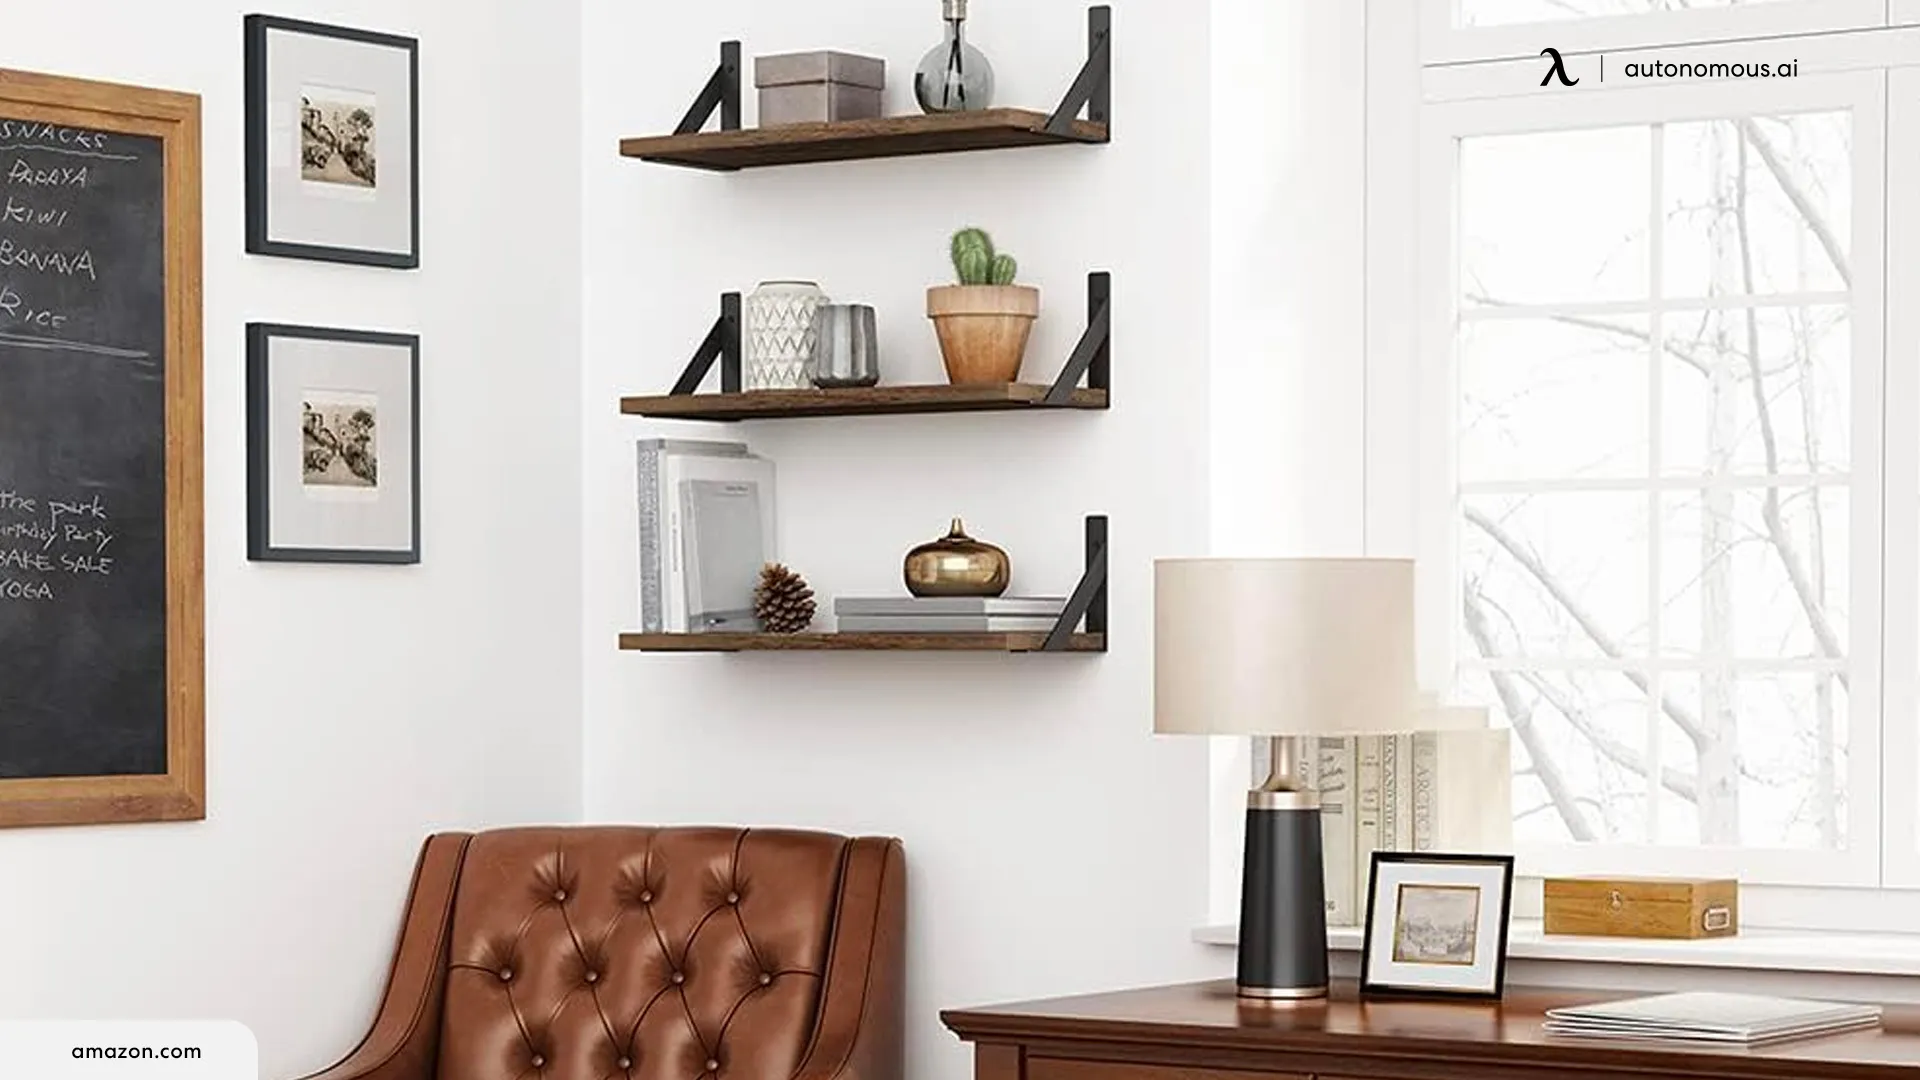 Save Valuable Space - Floating office shelves